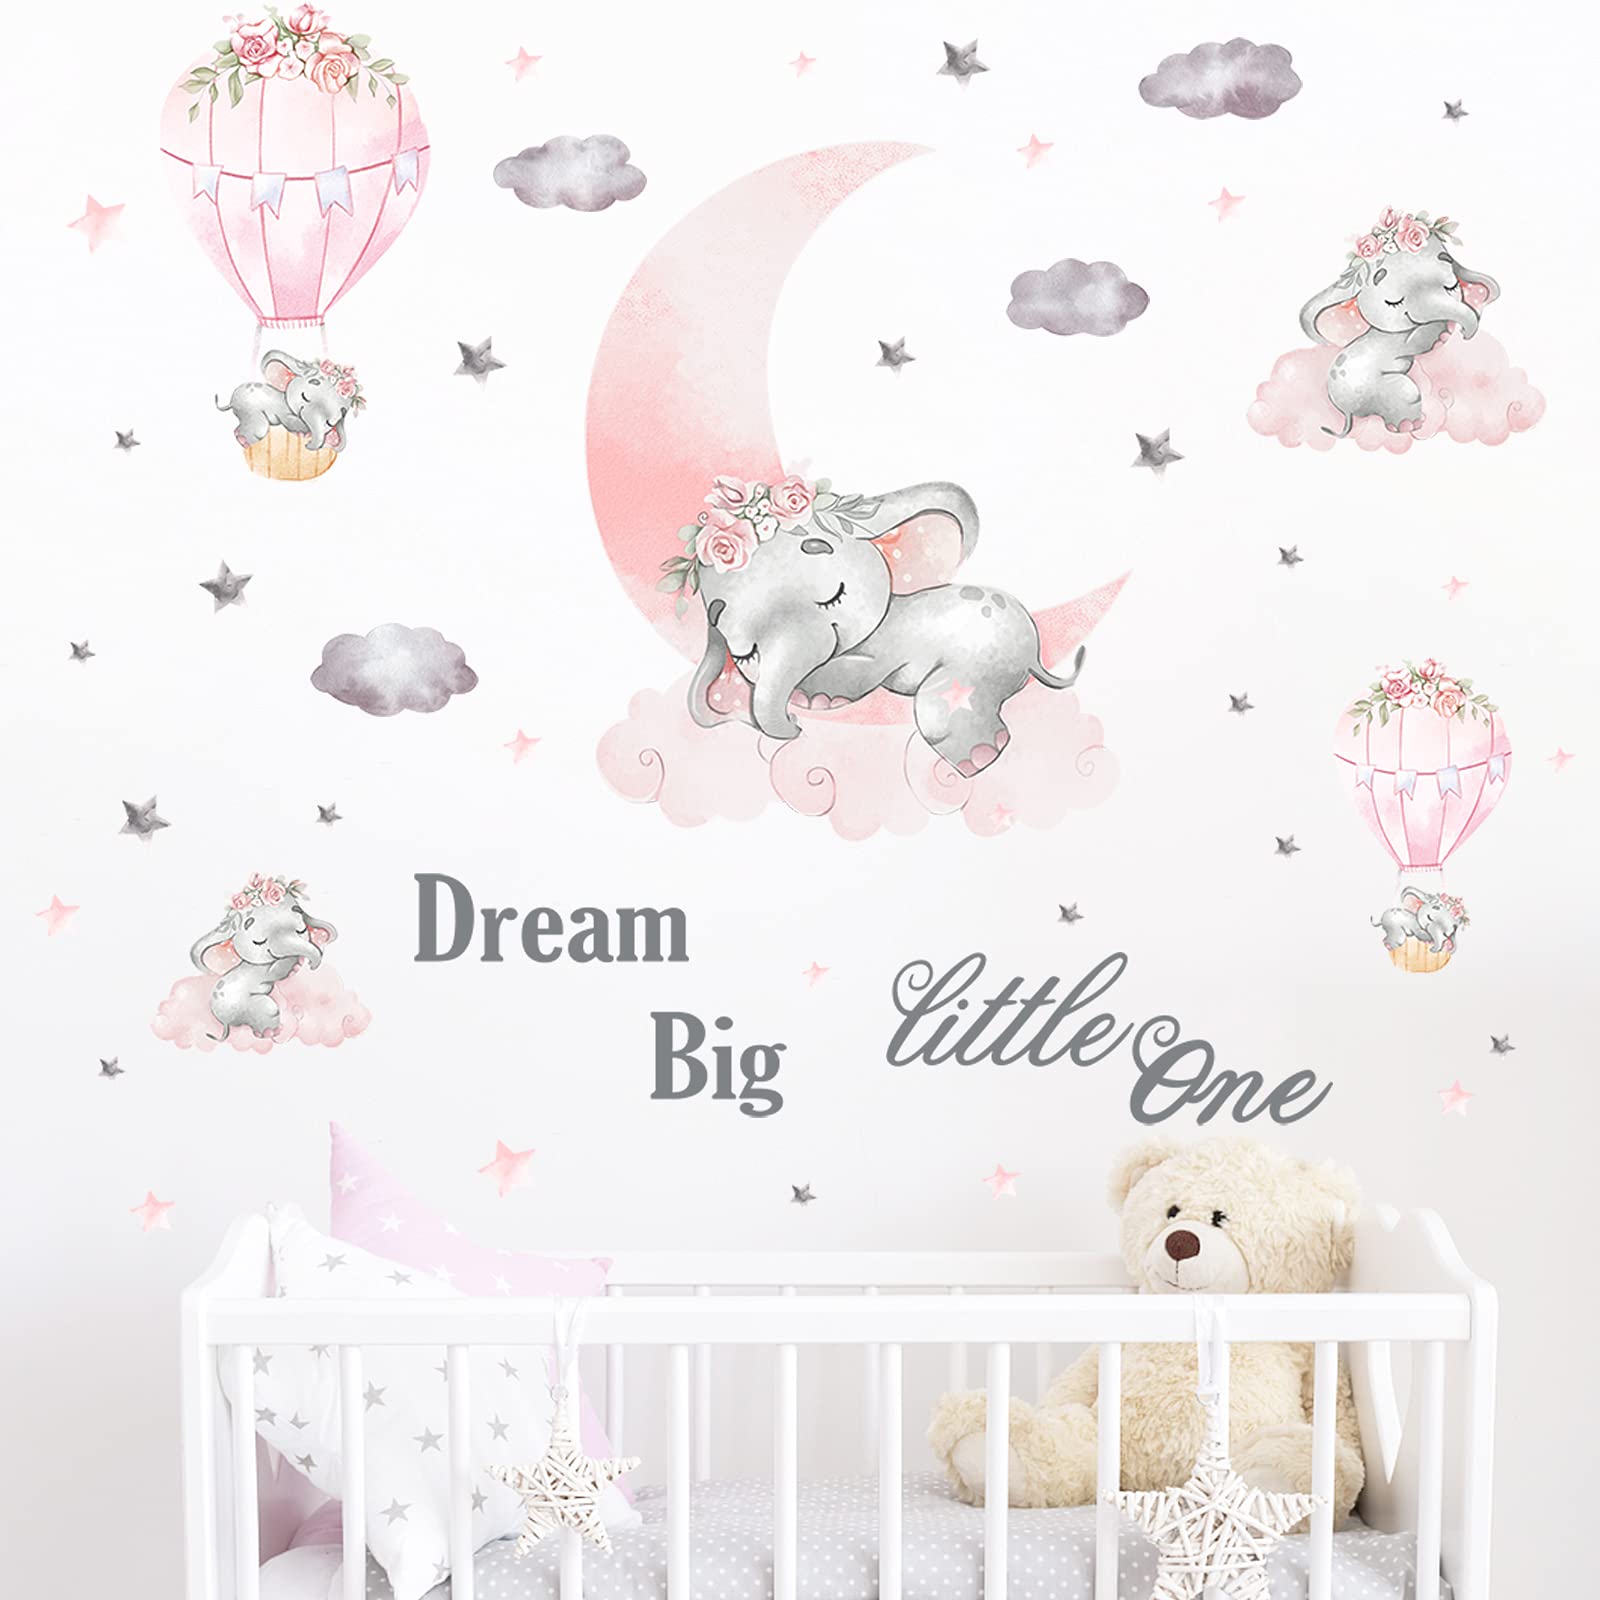 Cute Flying Elephant Wall Decals, JOENCOST Elephant Colorful Balloon Stars and Cloud Wall Stickers, Removable Cartoon Animals DIY Baby Decor Art Mural for Kids Nursery Bedroom Living Room